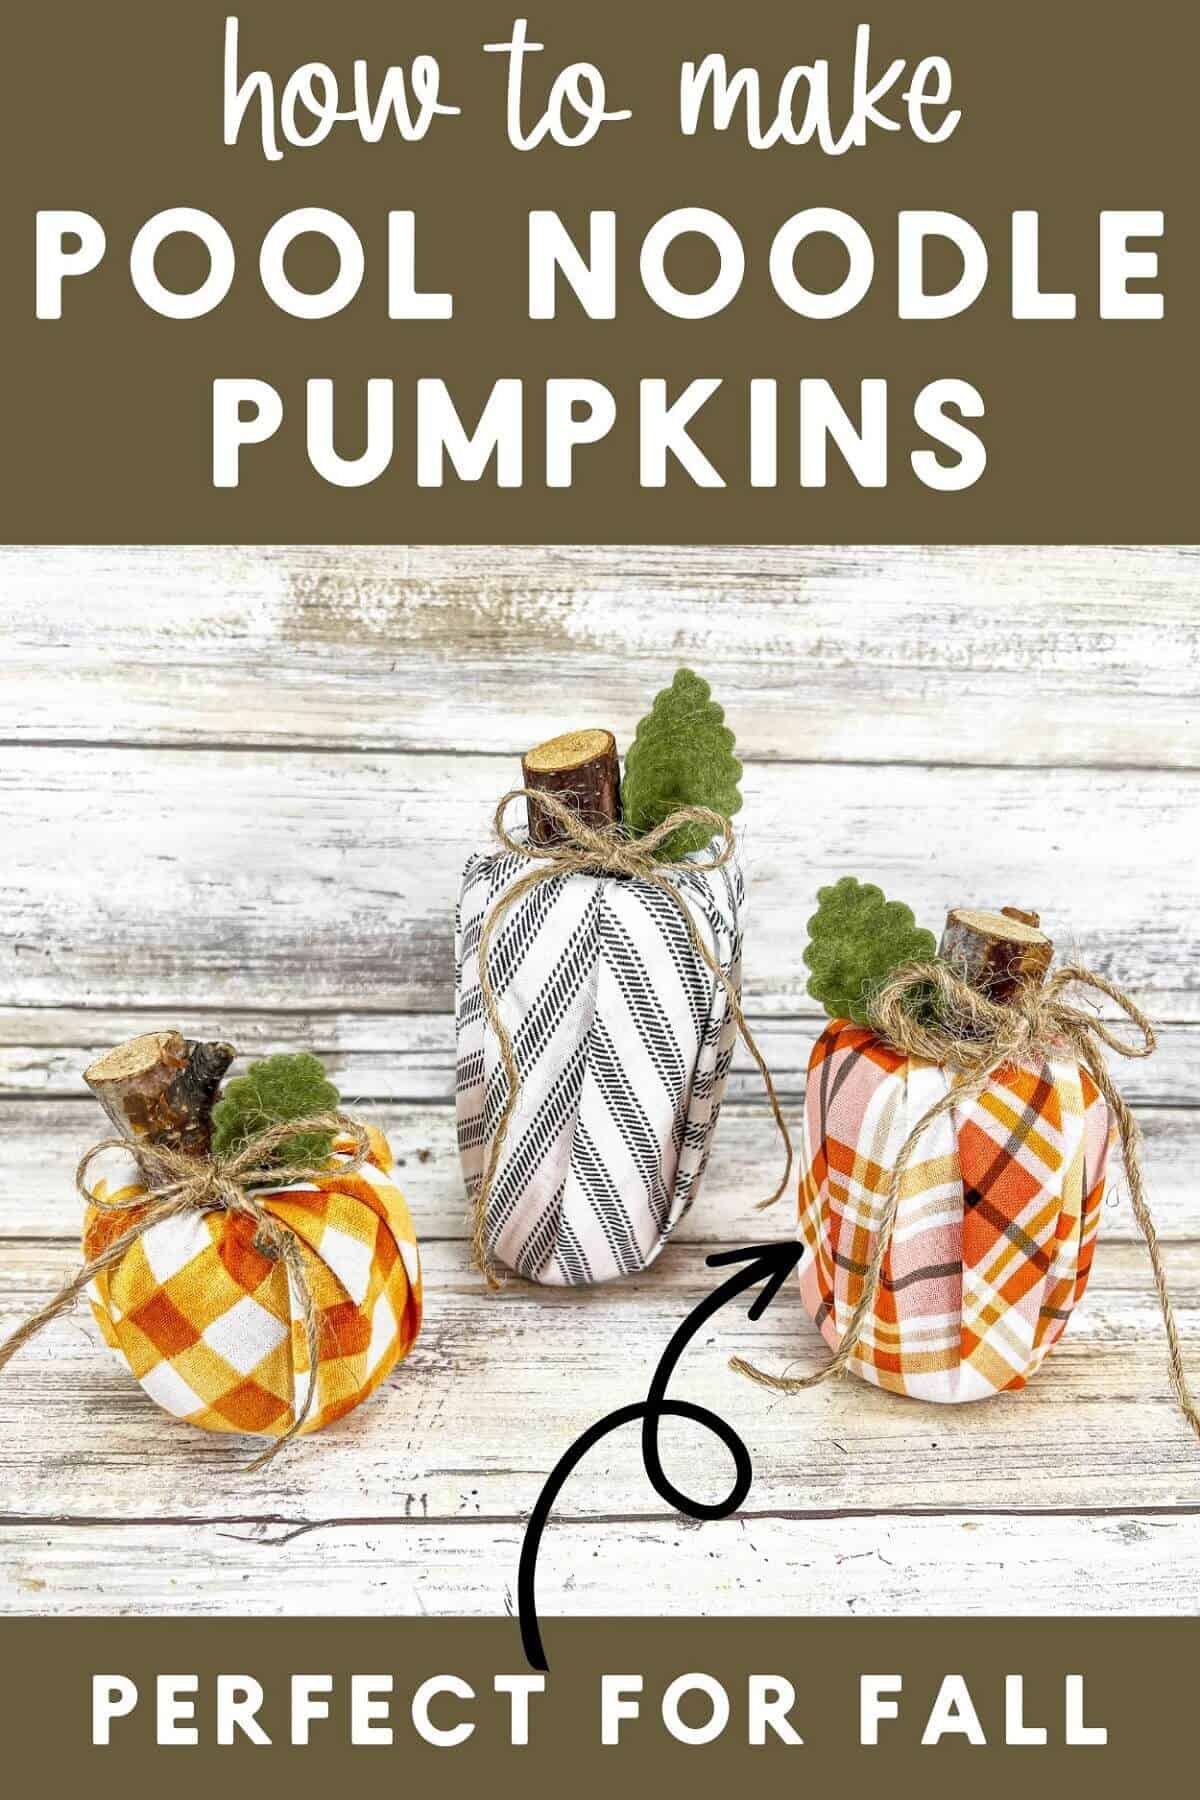 Three wrapped Dollar Store pool noodle pumpkins, one in black and white, one orange and white and one orange plaid, on a white and grey background.